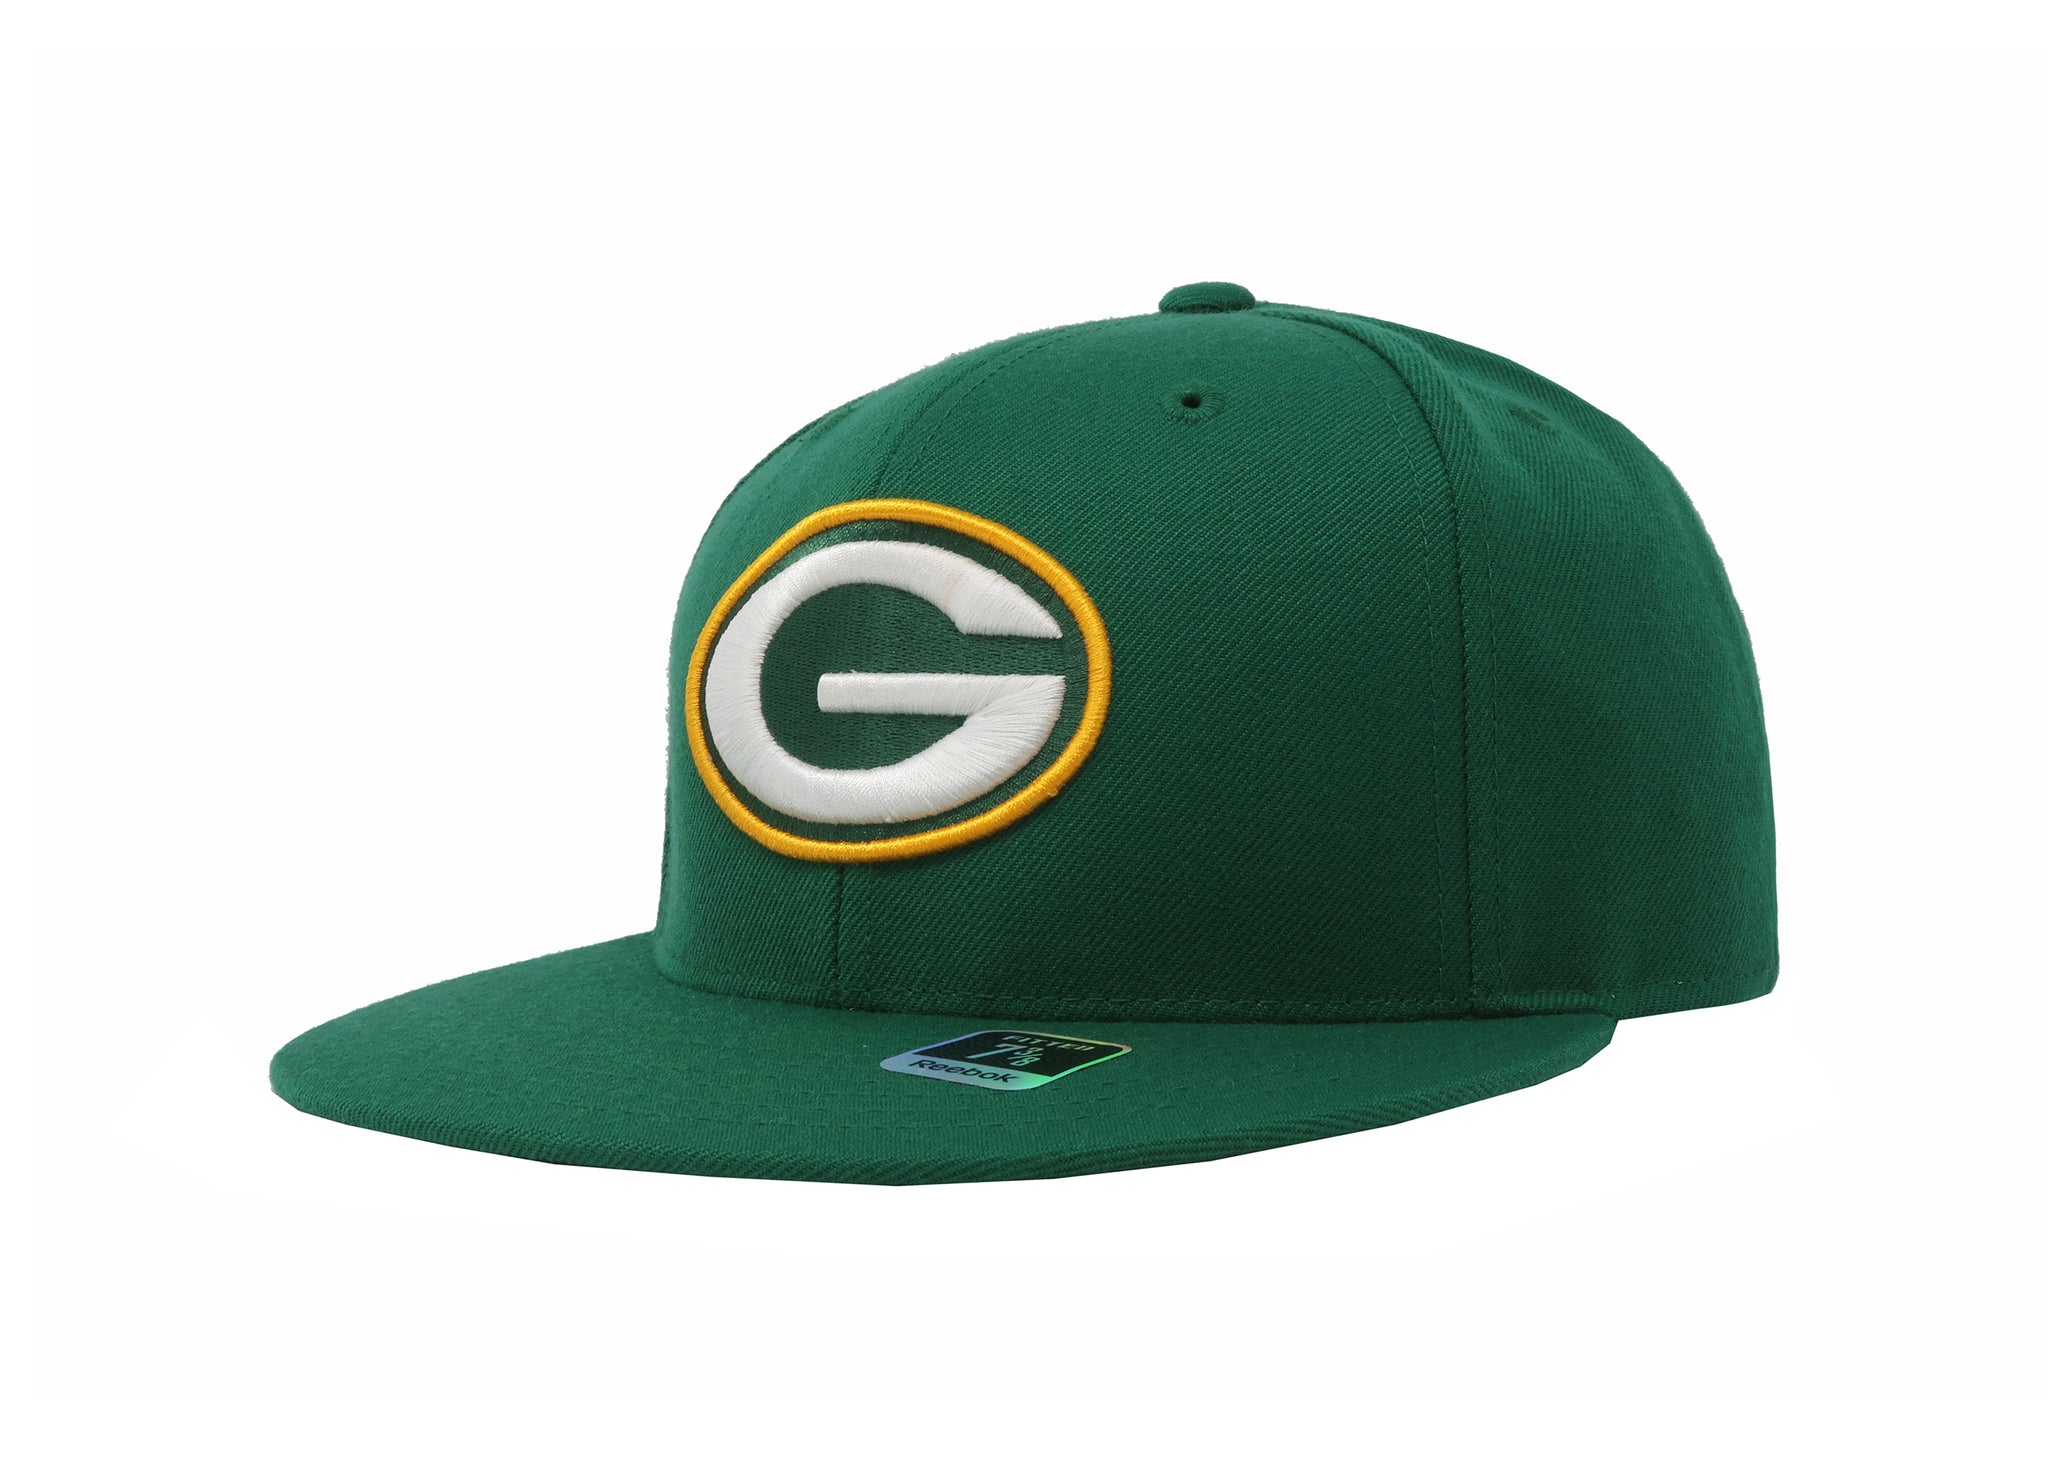 Reebok NFL Green Bay Packers Men's Fitted Football Cap